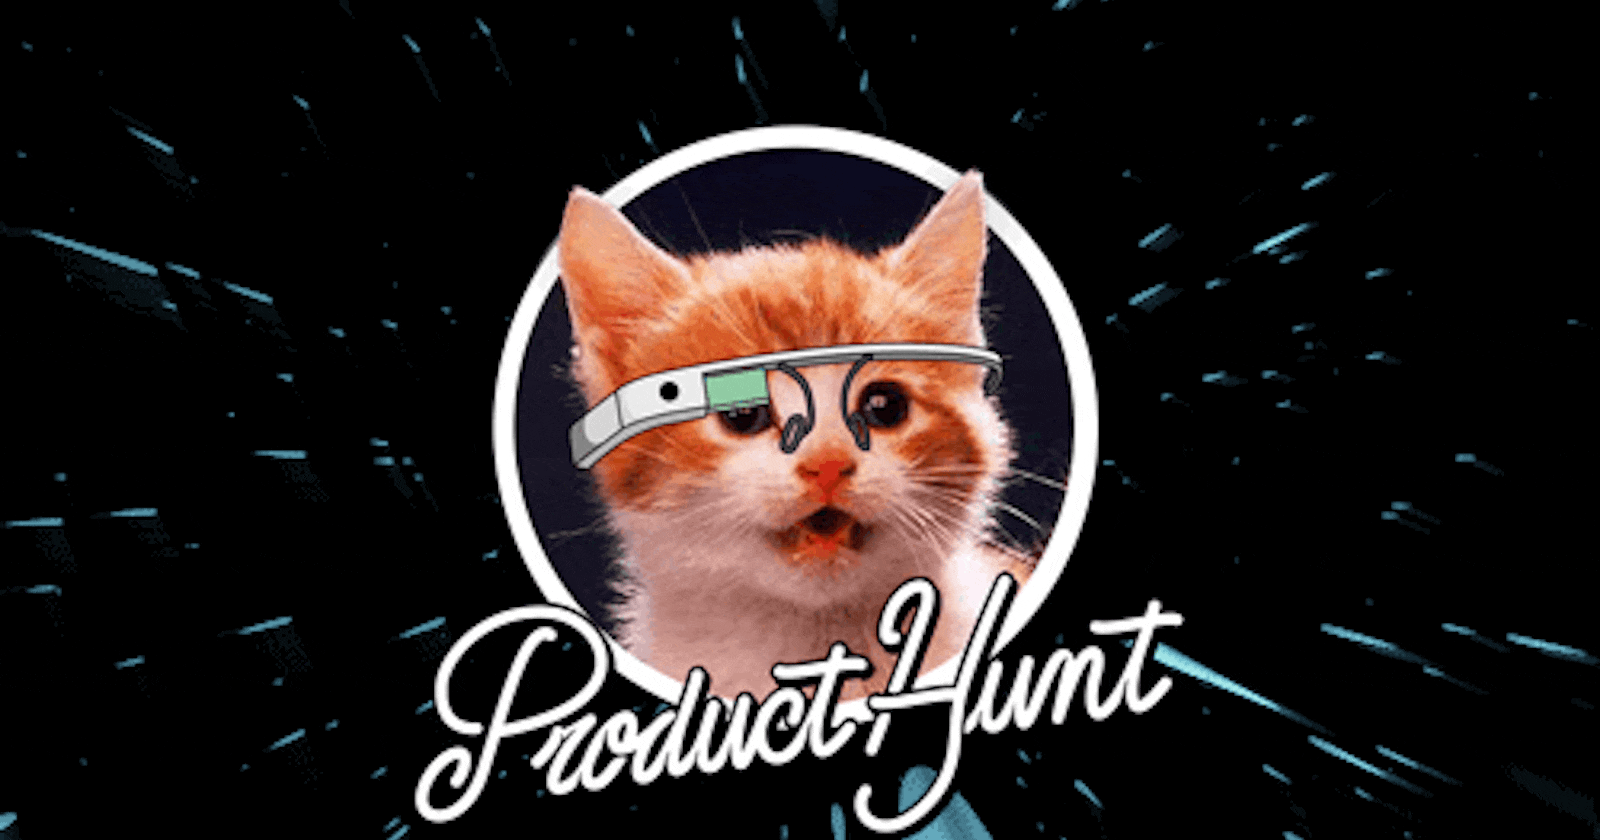 bohr.io needs your help to score in the Product Hunt!